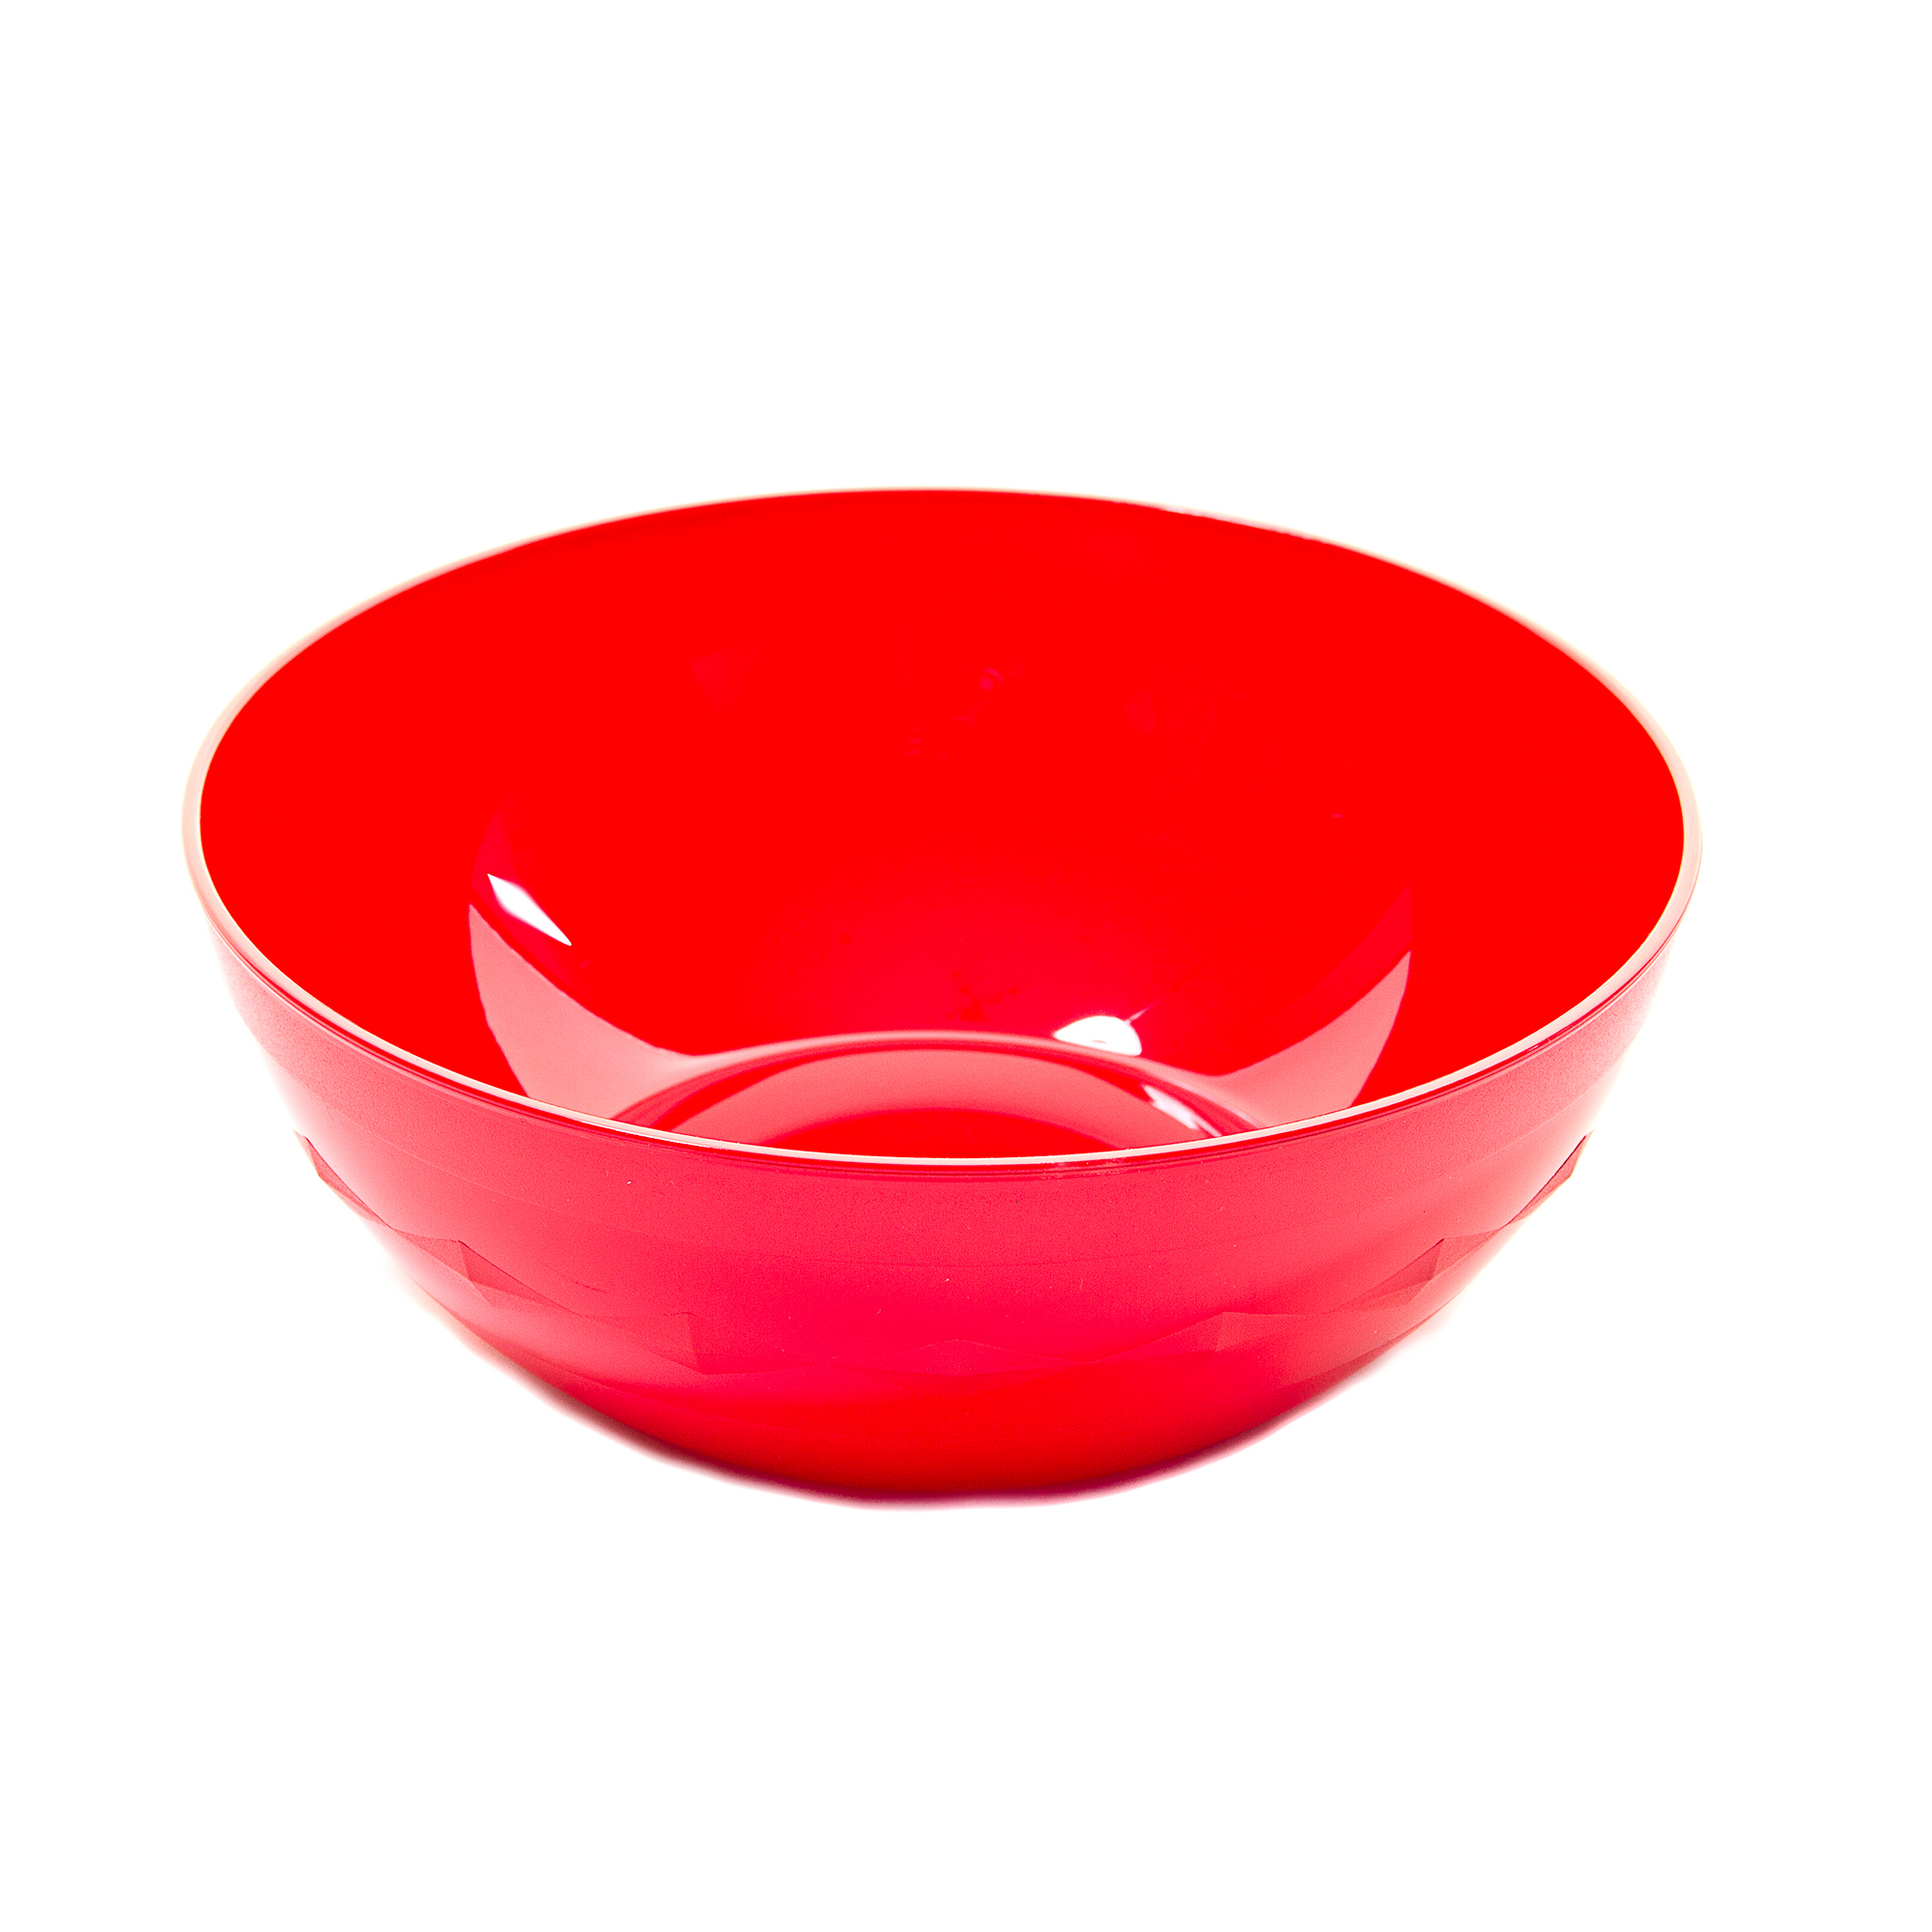 Serving Bowl - Red